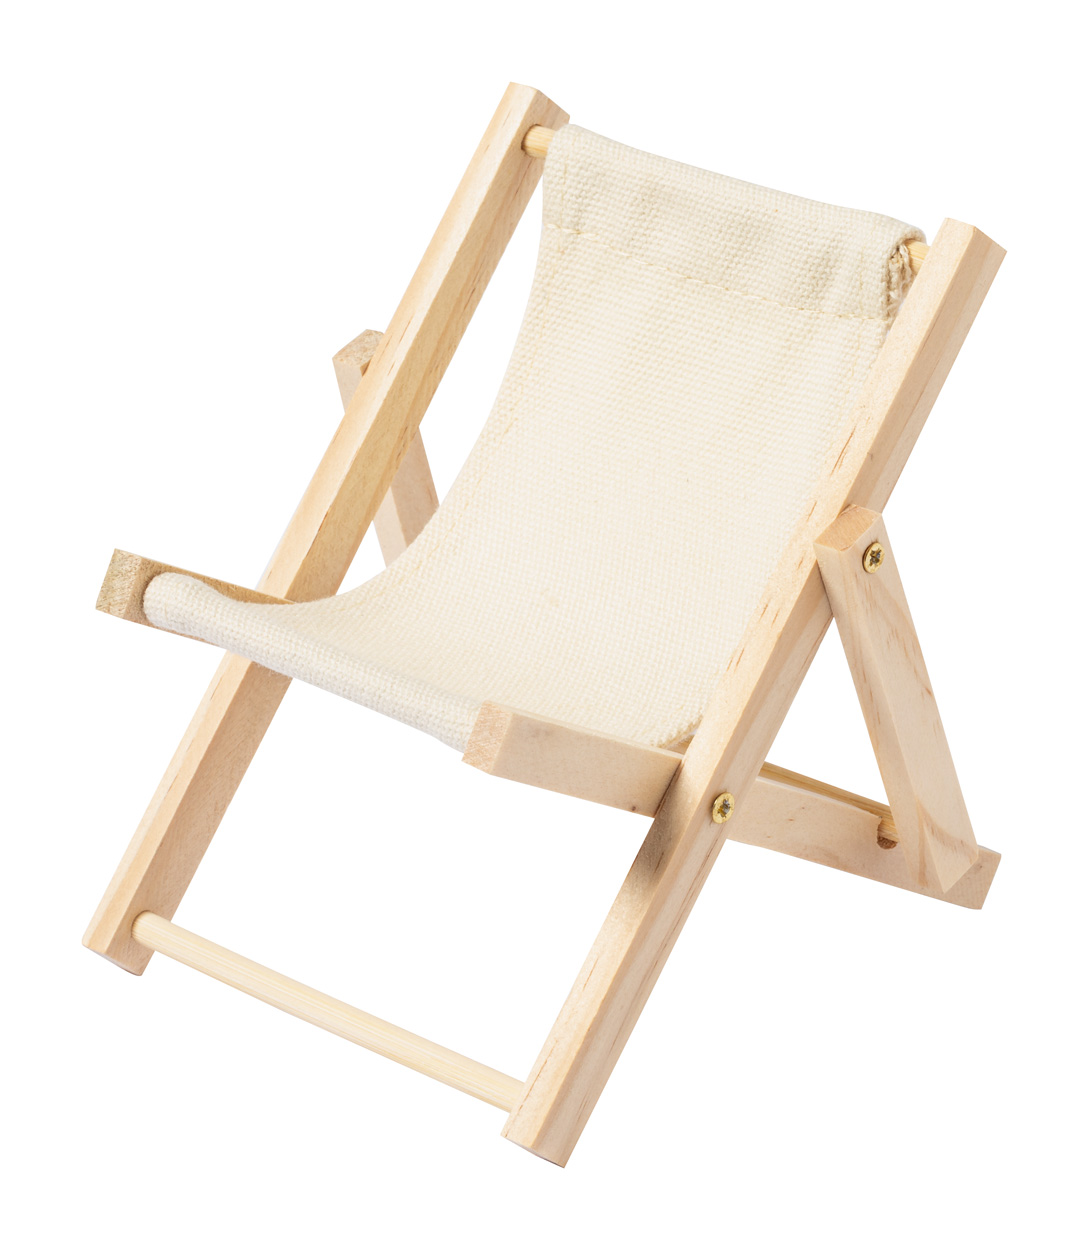 Wooden mobile phone holder MEDRUS in the shape of a deckchair - natural